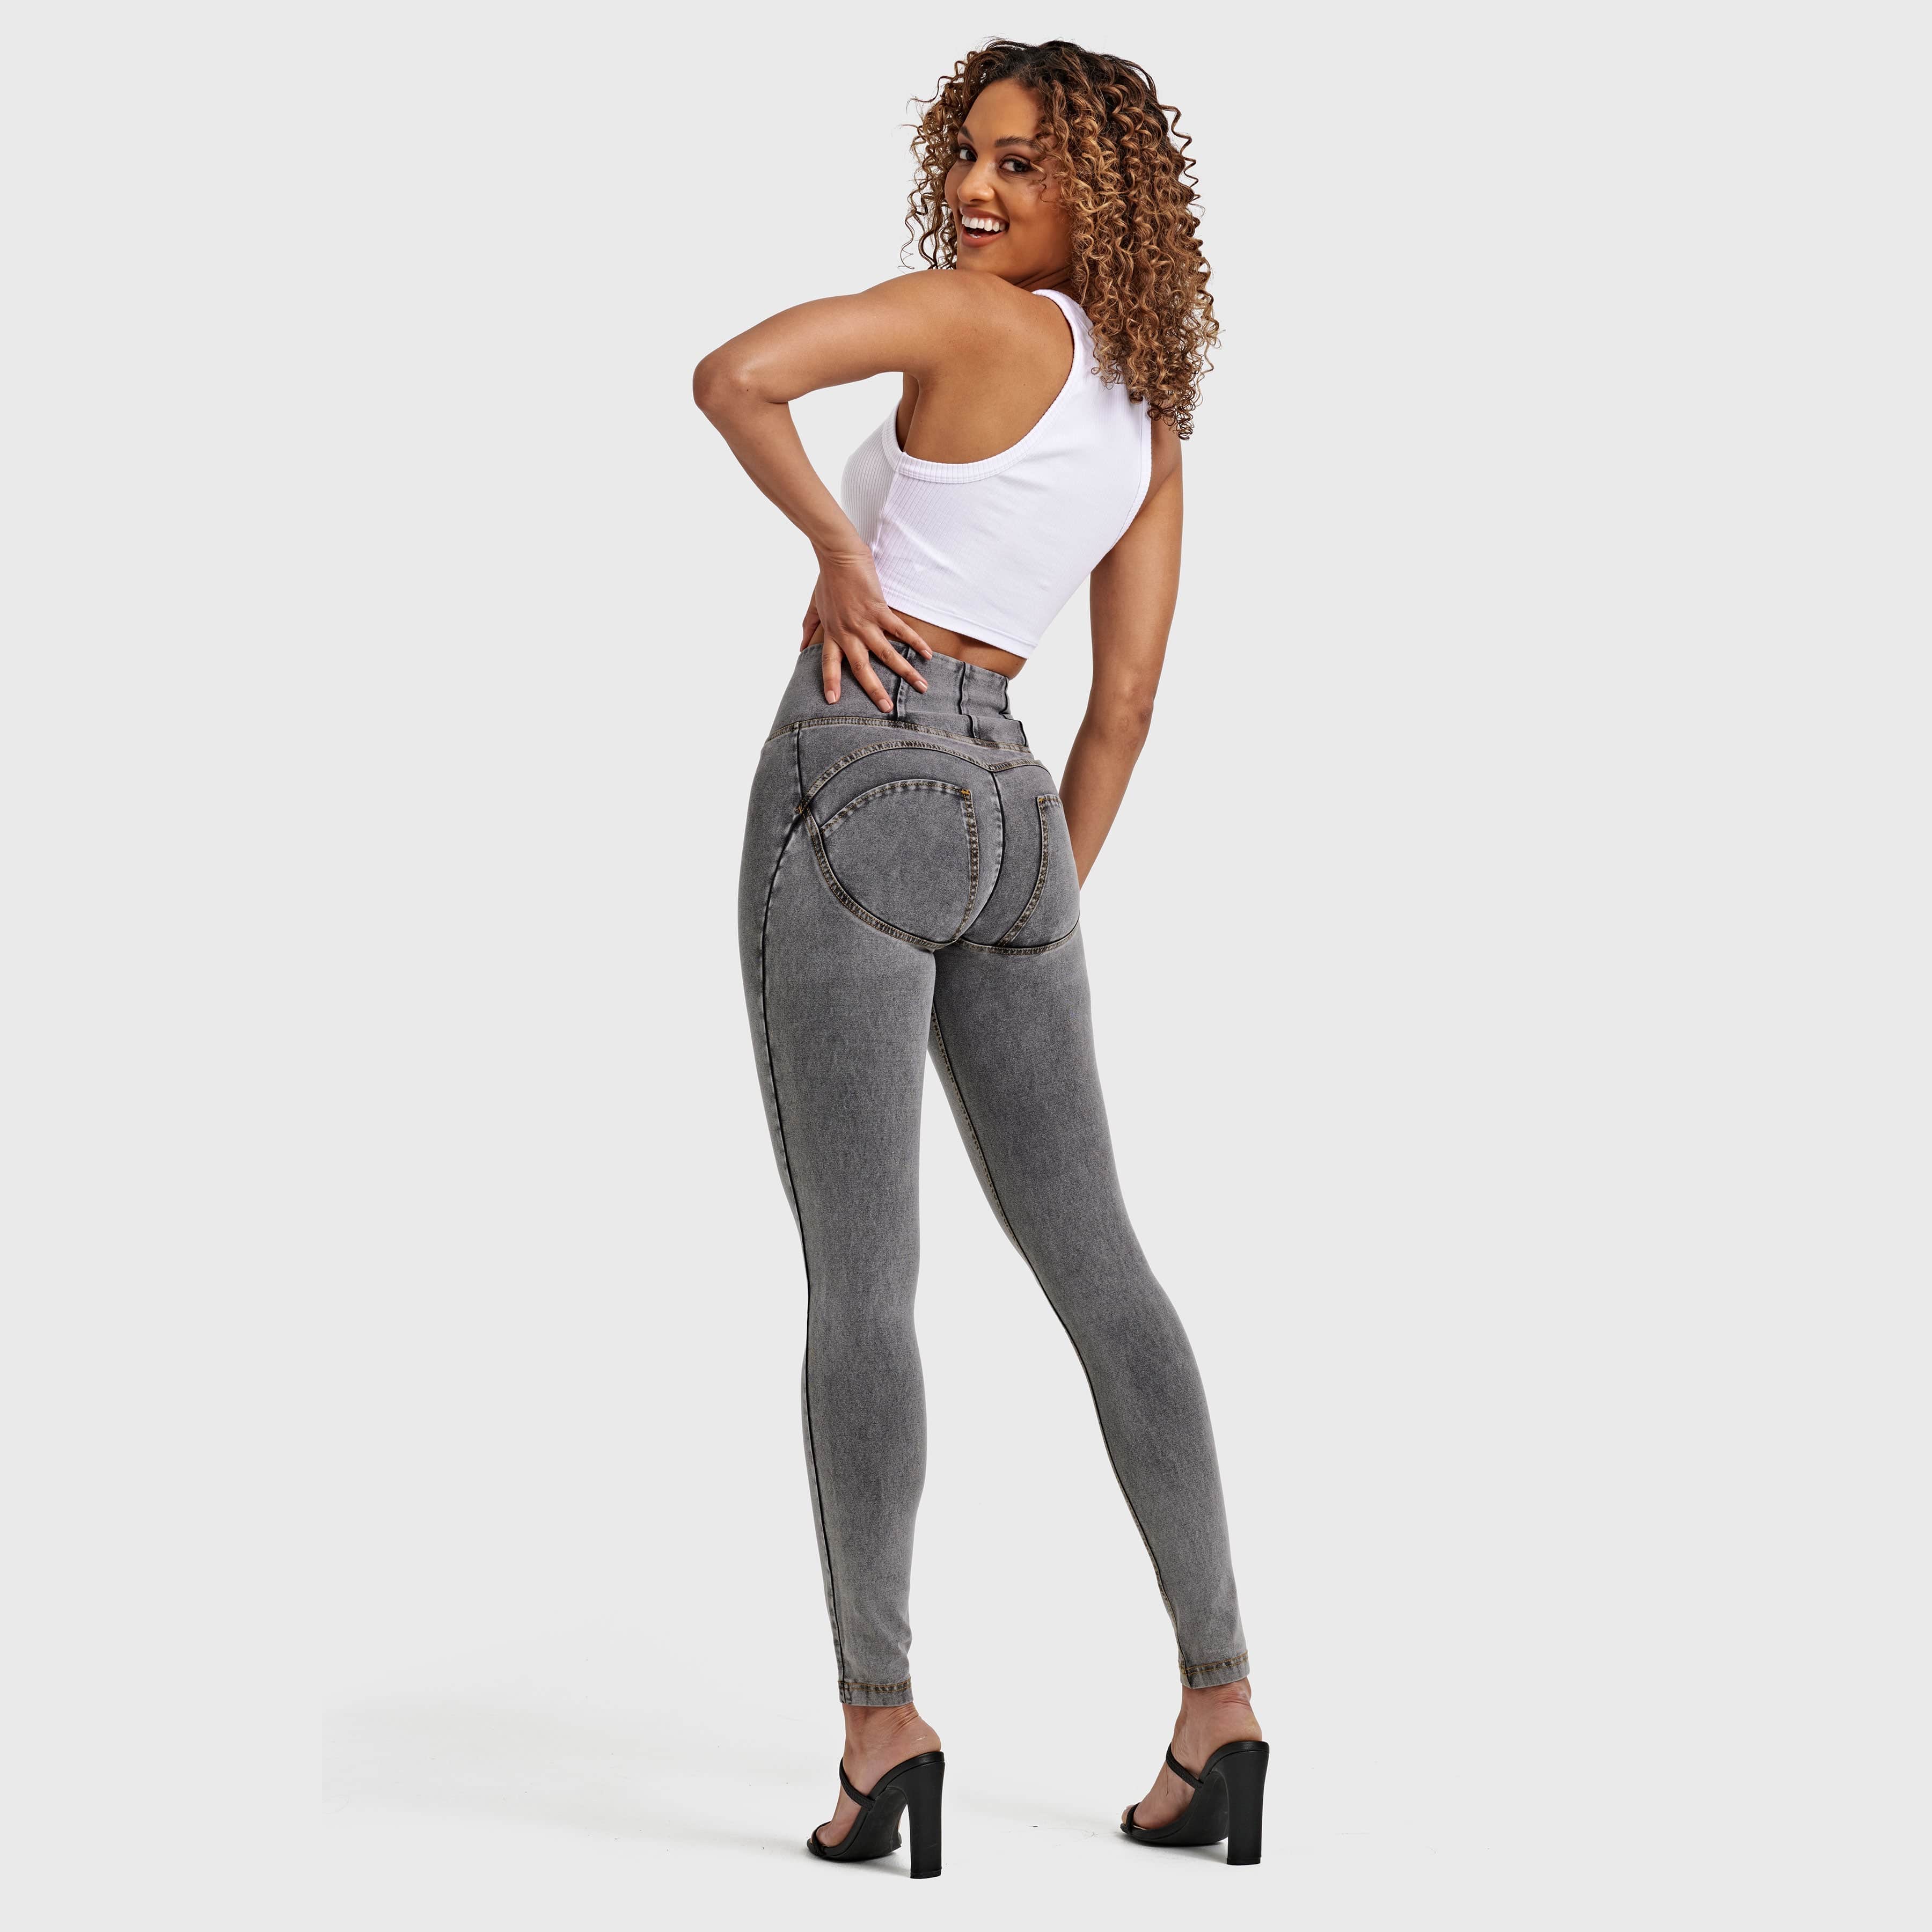 WR.UP® Denim - High Waisted - Full Length - Grey + Yellow Stitching 2